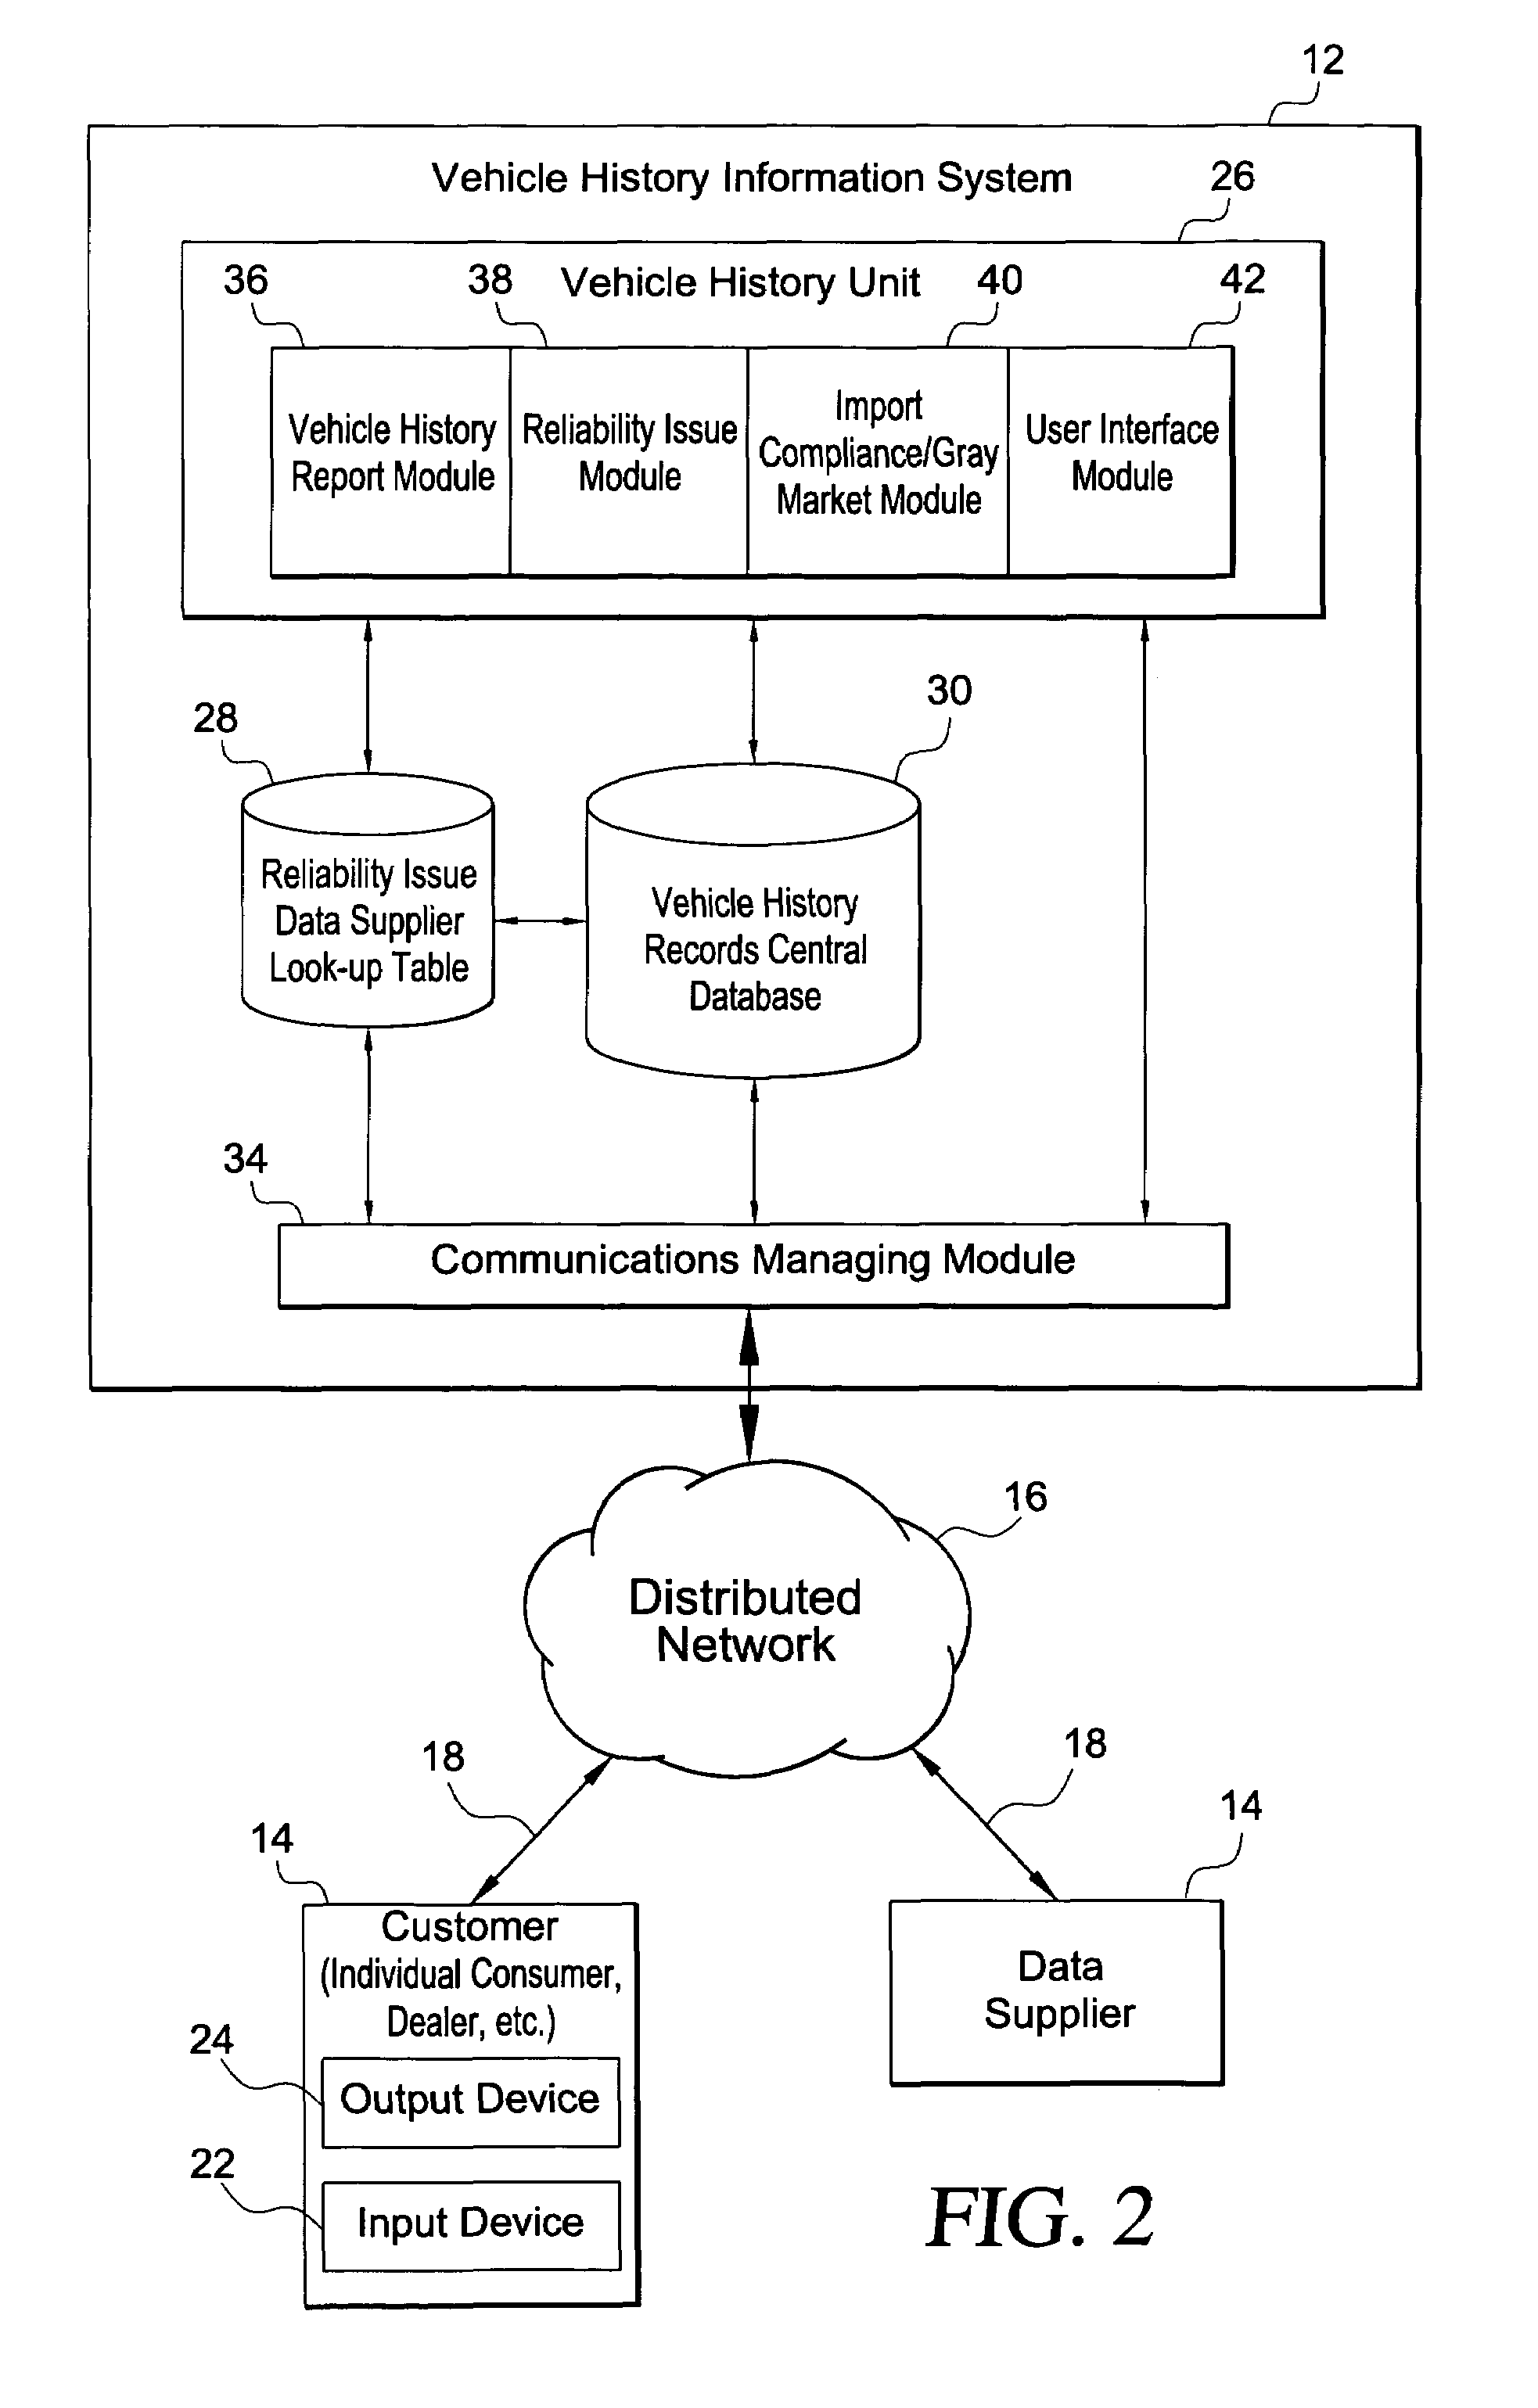 System and method for generating vehicle history information